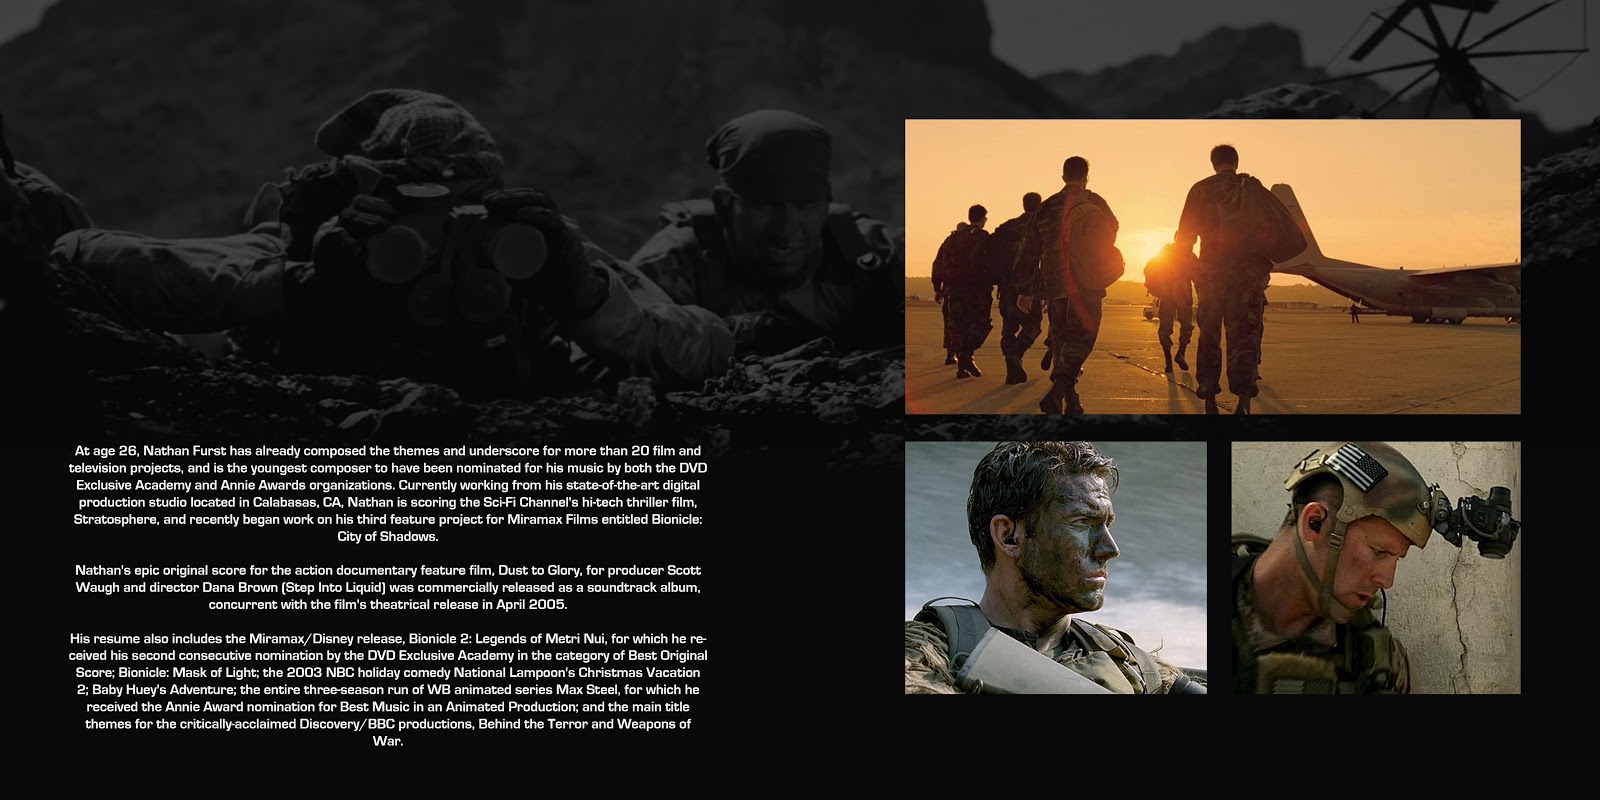 act of valor true story